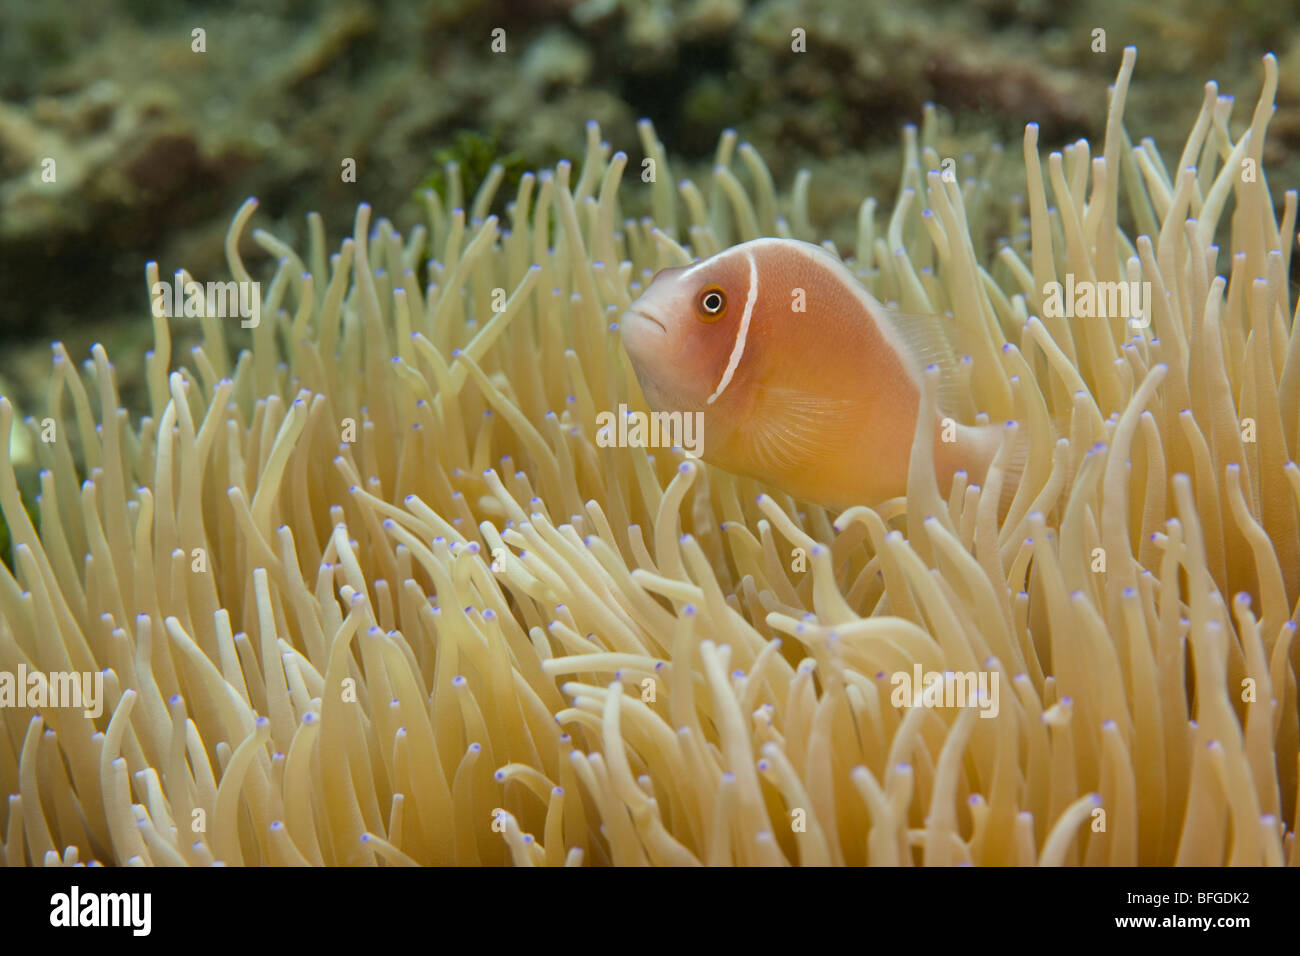 Pink Anemonefish (Amphiprion perideraion) in Sea Anemone, Lembeh Strait, North Sulawesi, Indonesia. Stock Photo